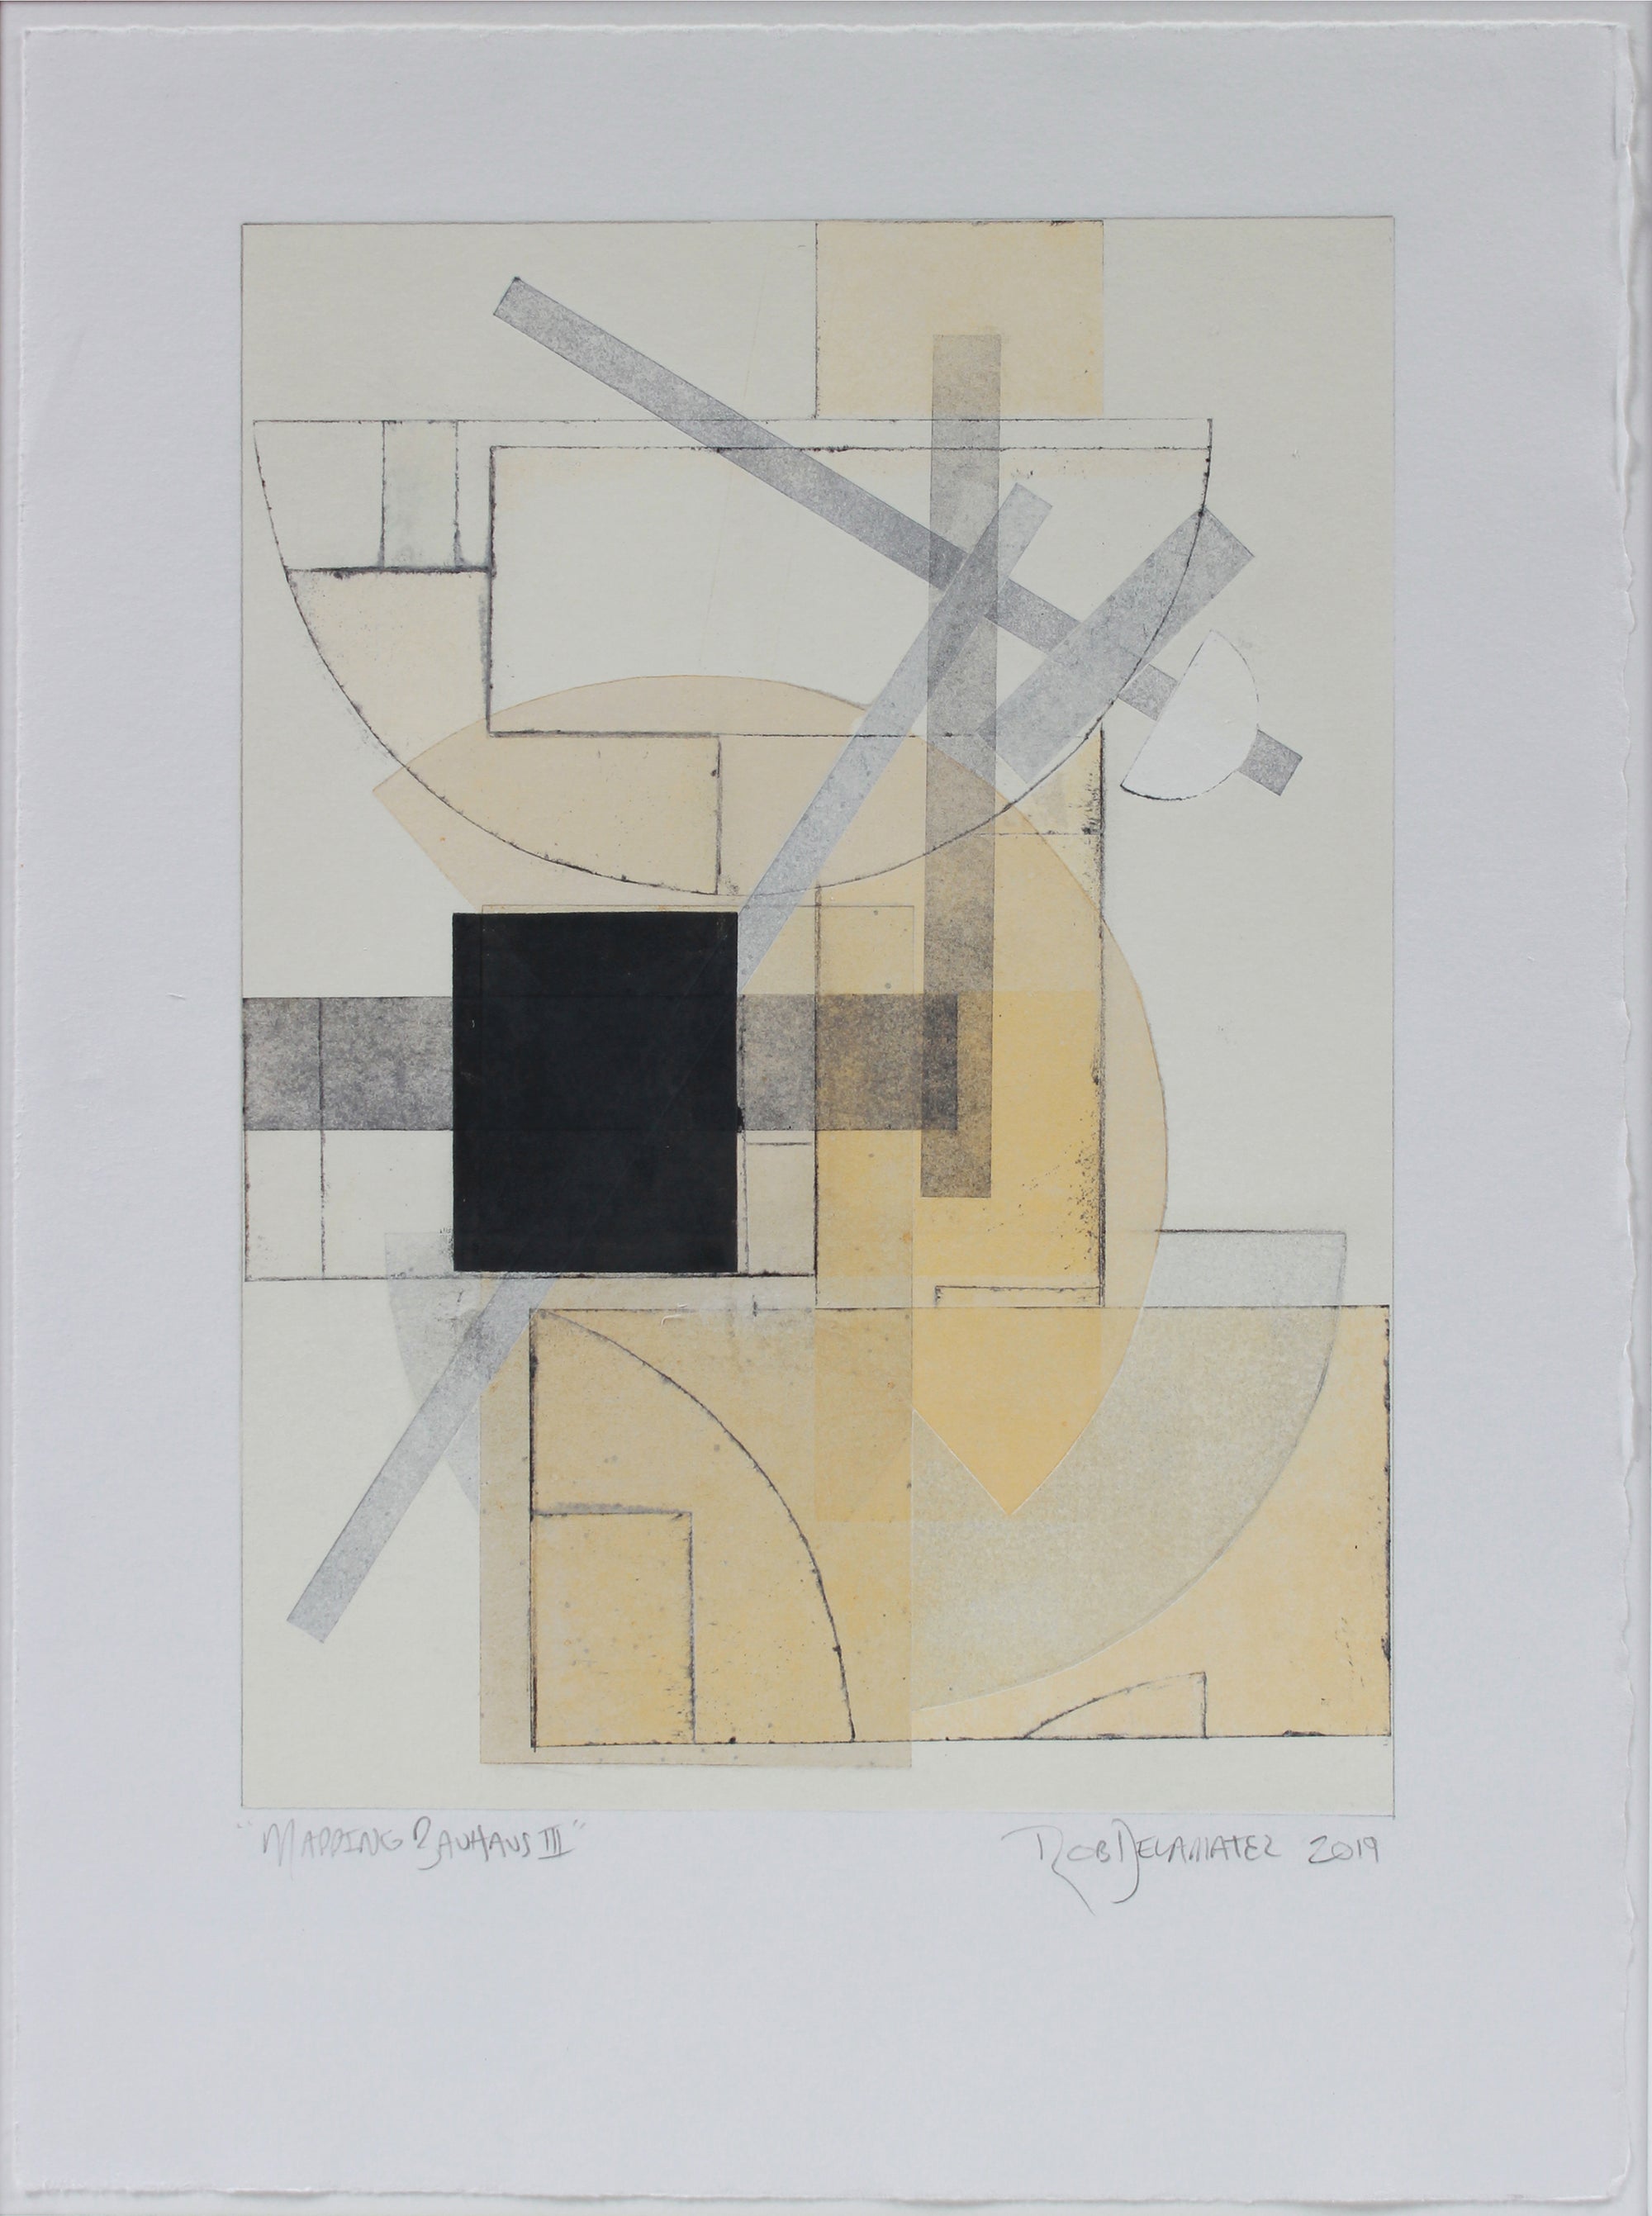 <i>Mapping Bauhaus III</i> <br>2019 Monotype <br><br>#A9092